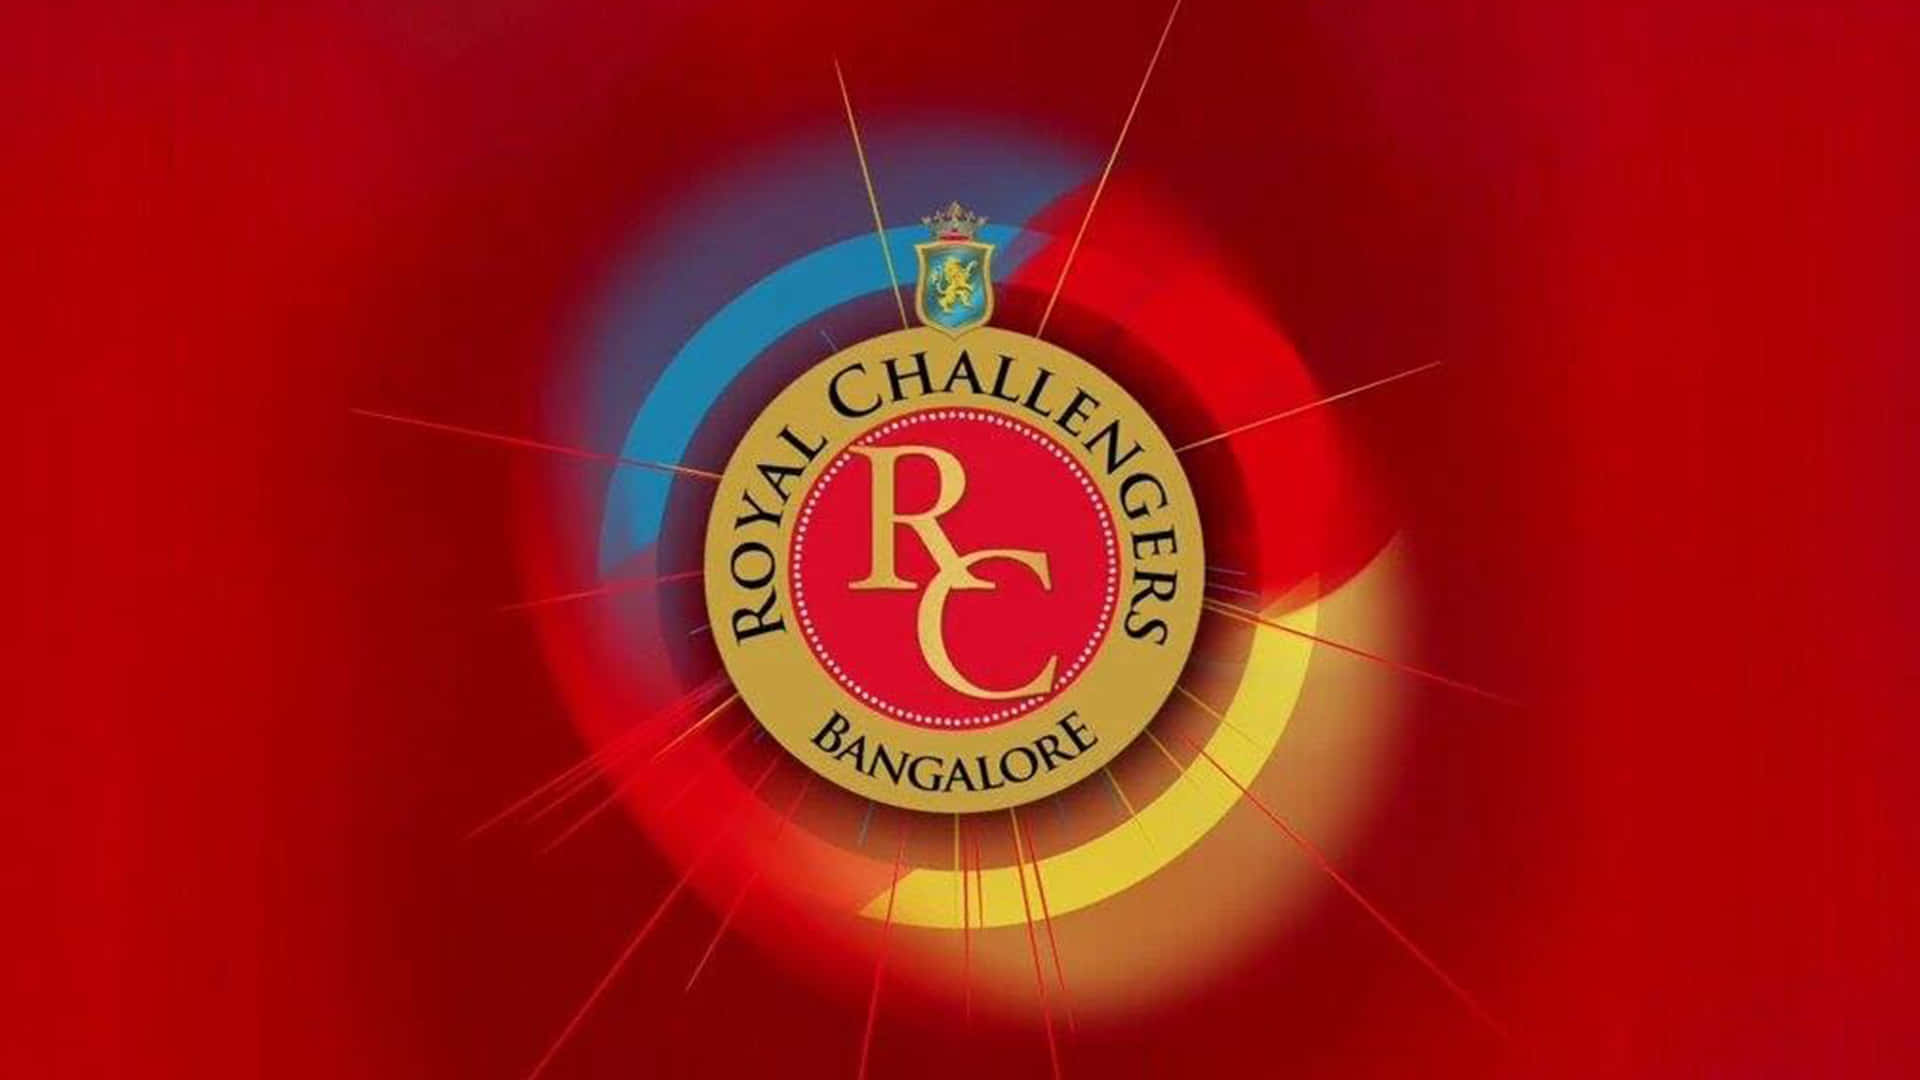 Royal Challengers Bangalore: Champions of opportunity